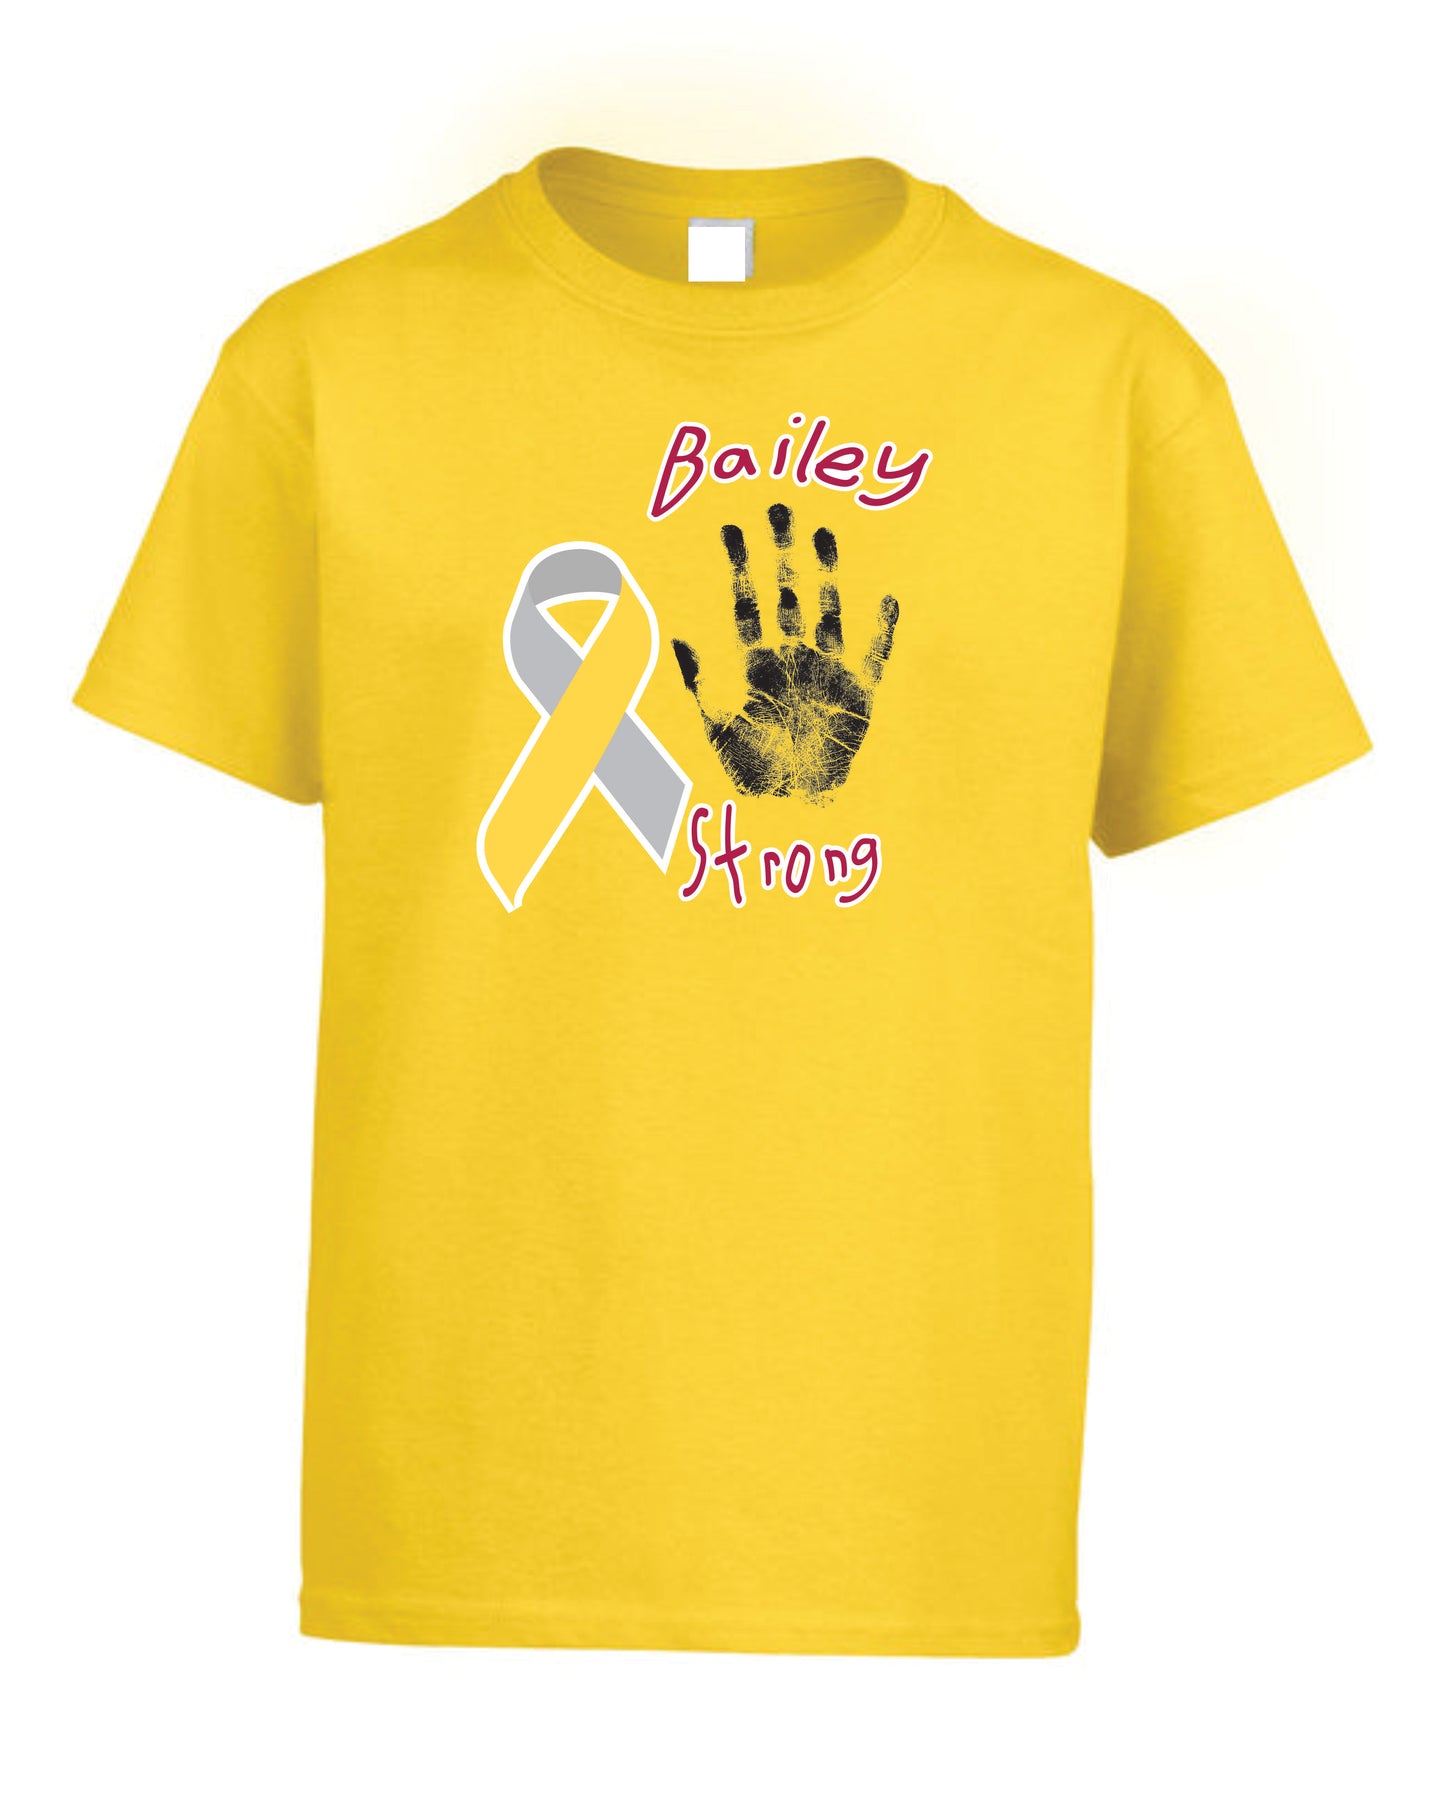 Bailey Strong YOUTH T-shirt